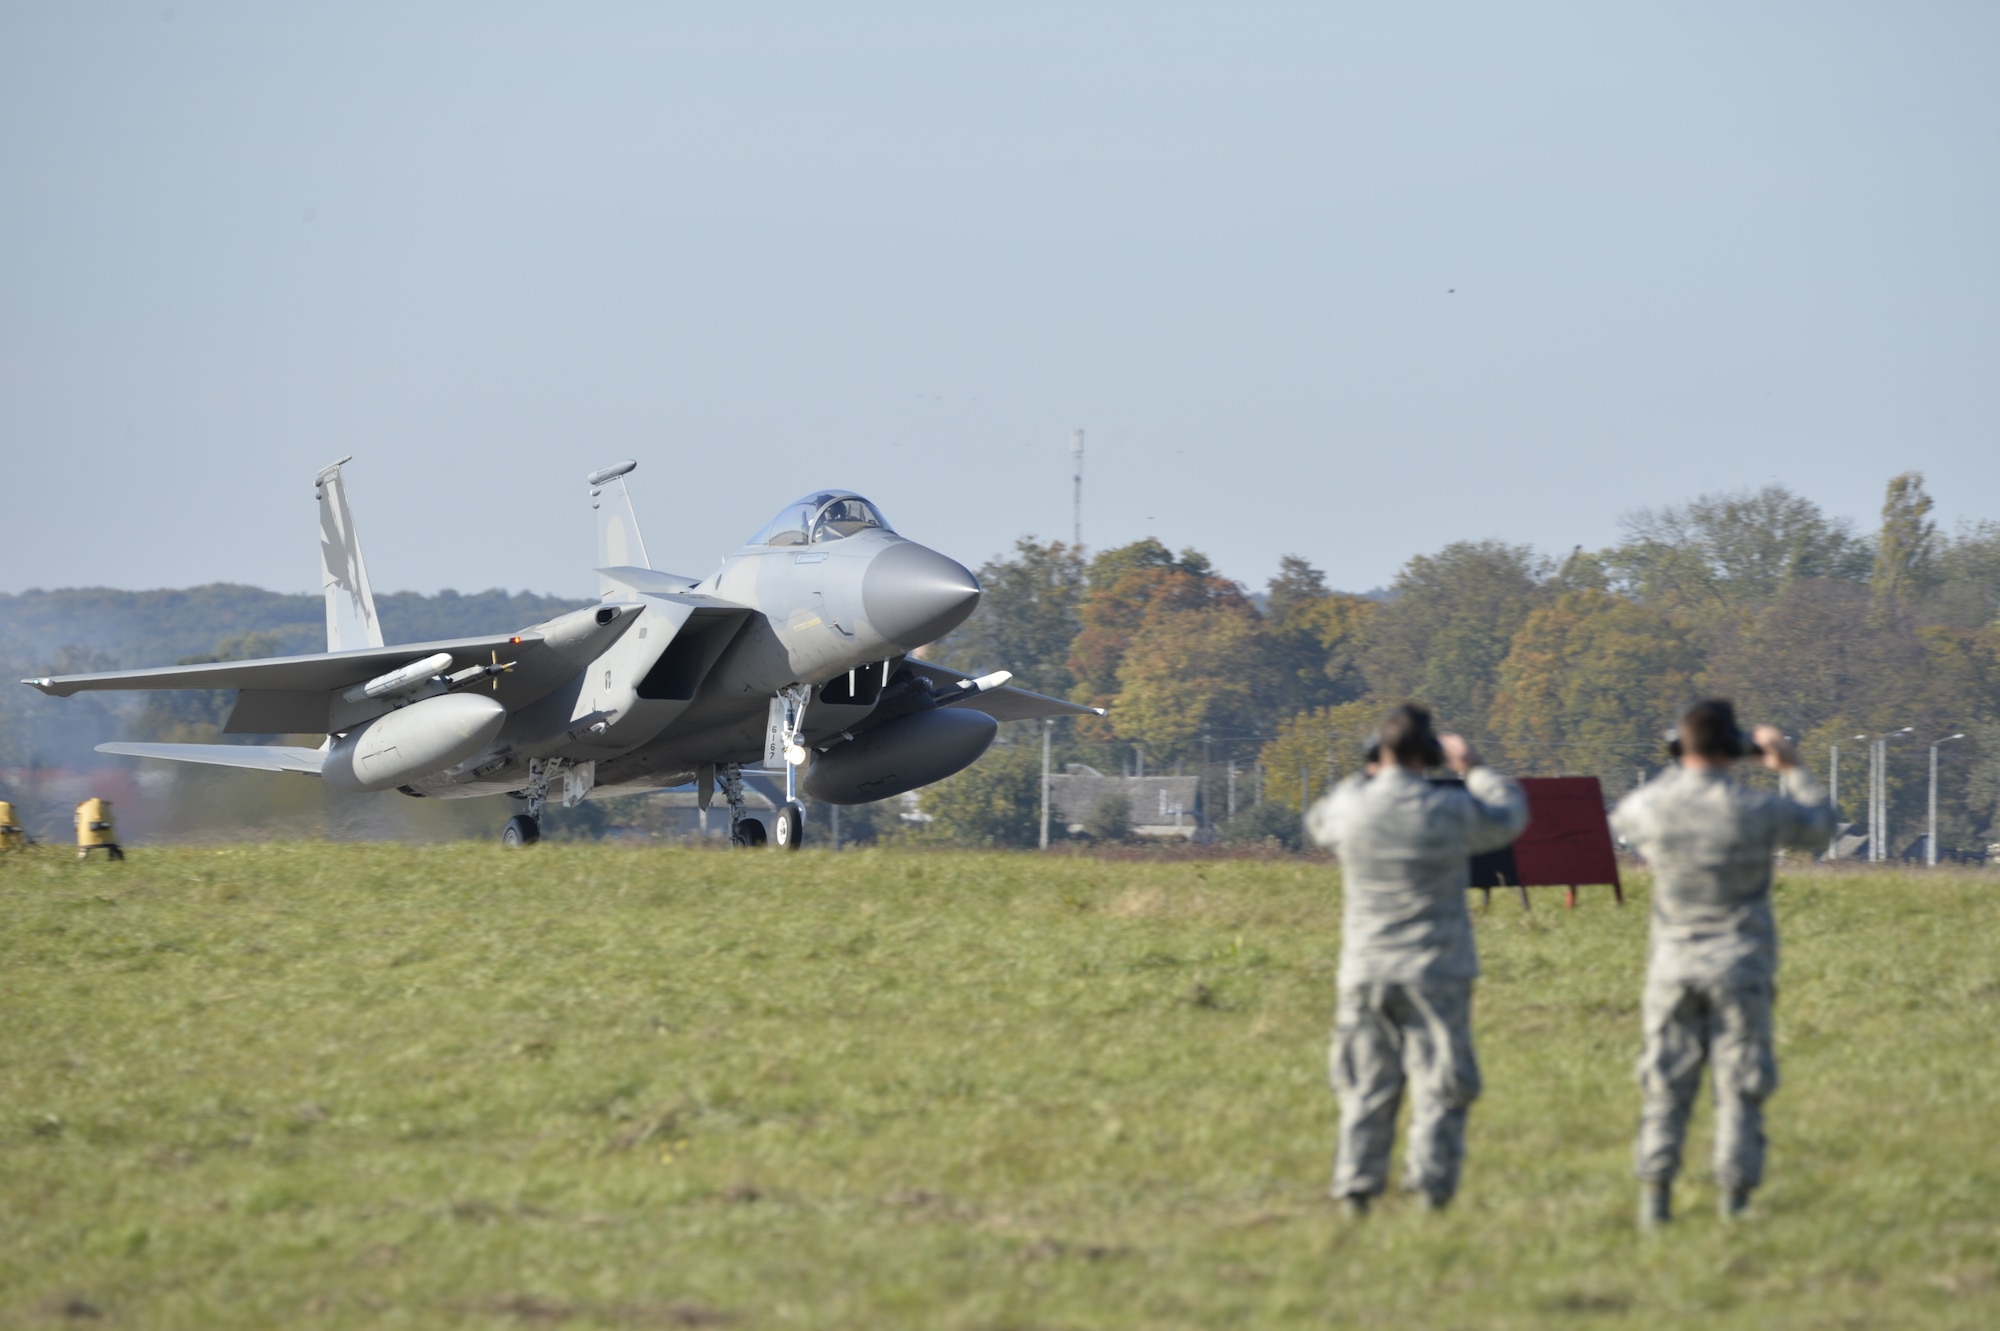 A U.S. Air Force F-15C Eagle fighter jet lands for the first time ever, Oct. 6, on Ukrainian soil, as U.S. Airmen watch, to participate in CLEAR SKY 2018.